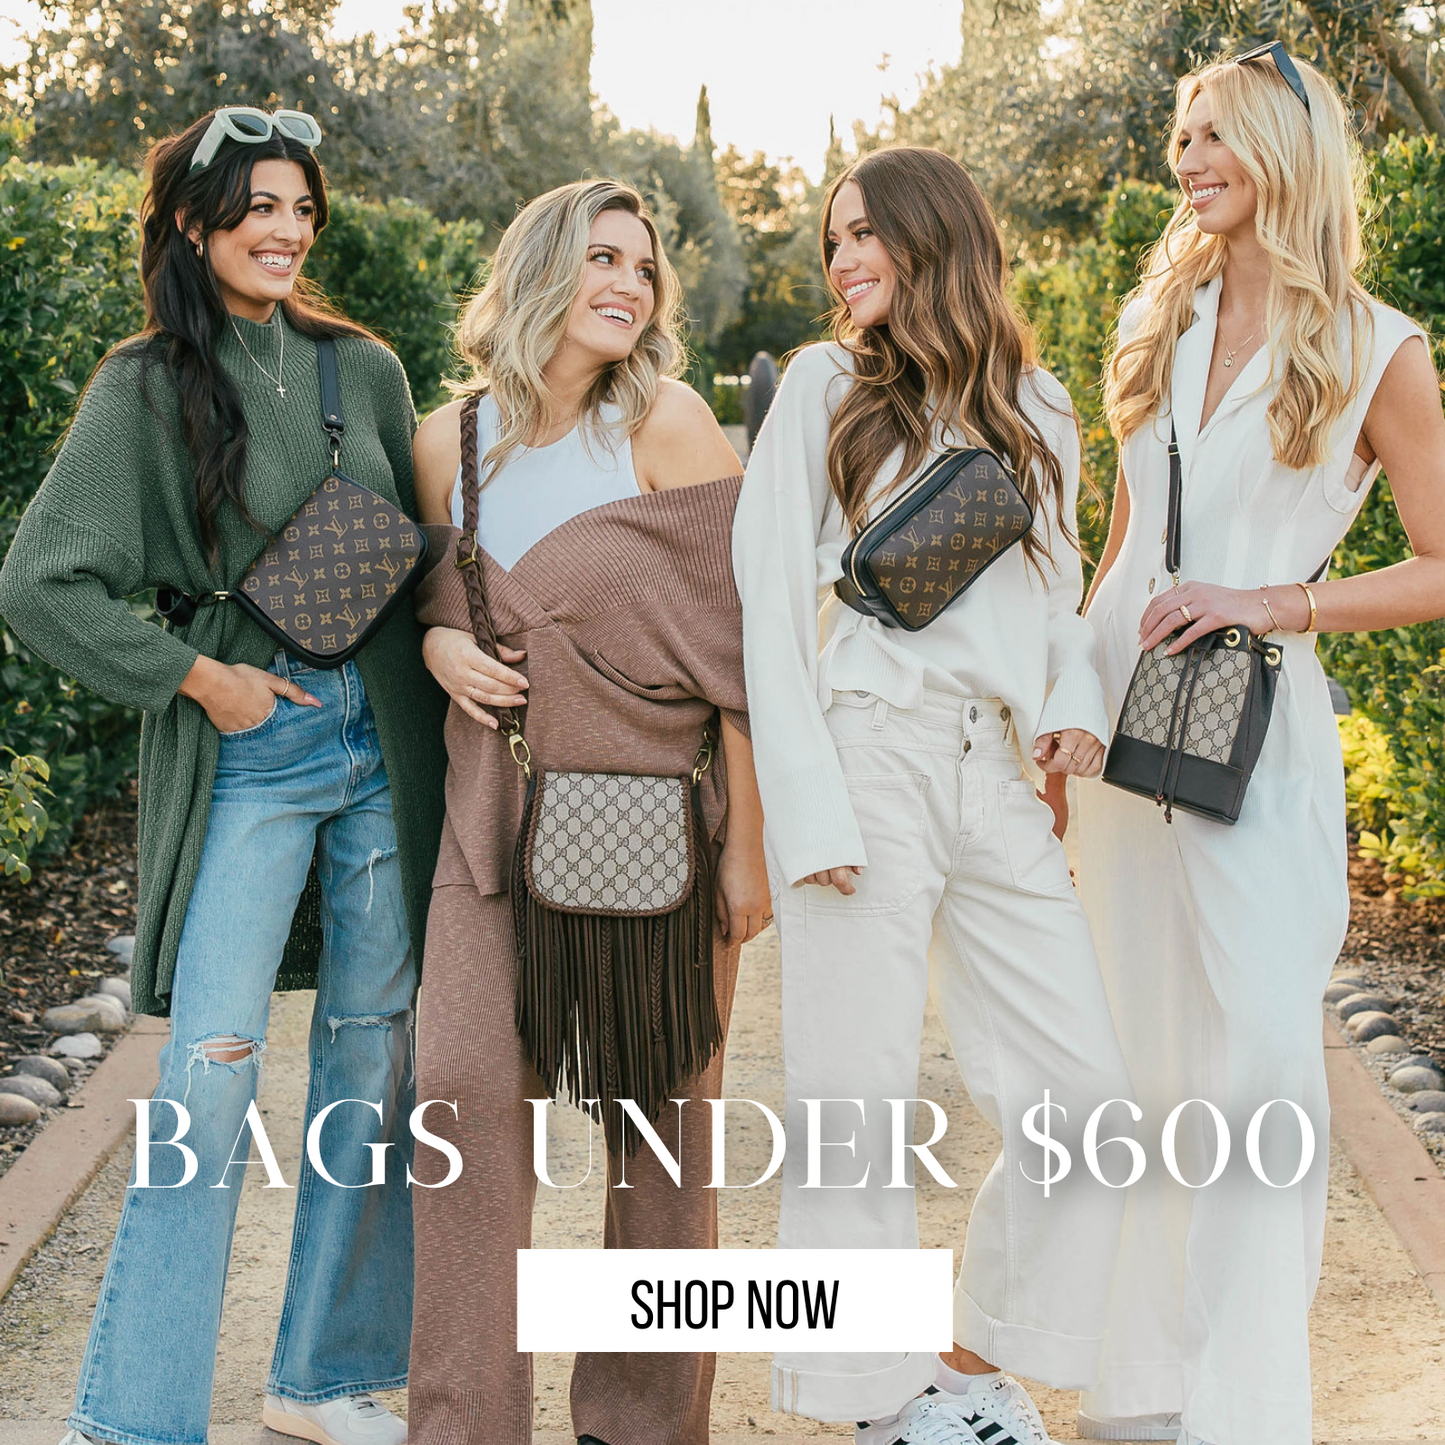 Bags Under $600